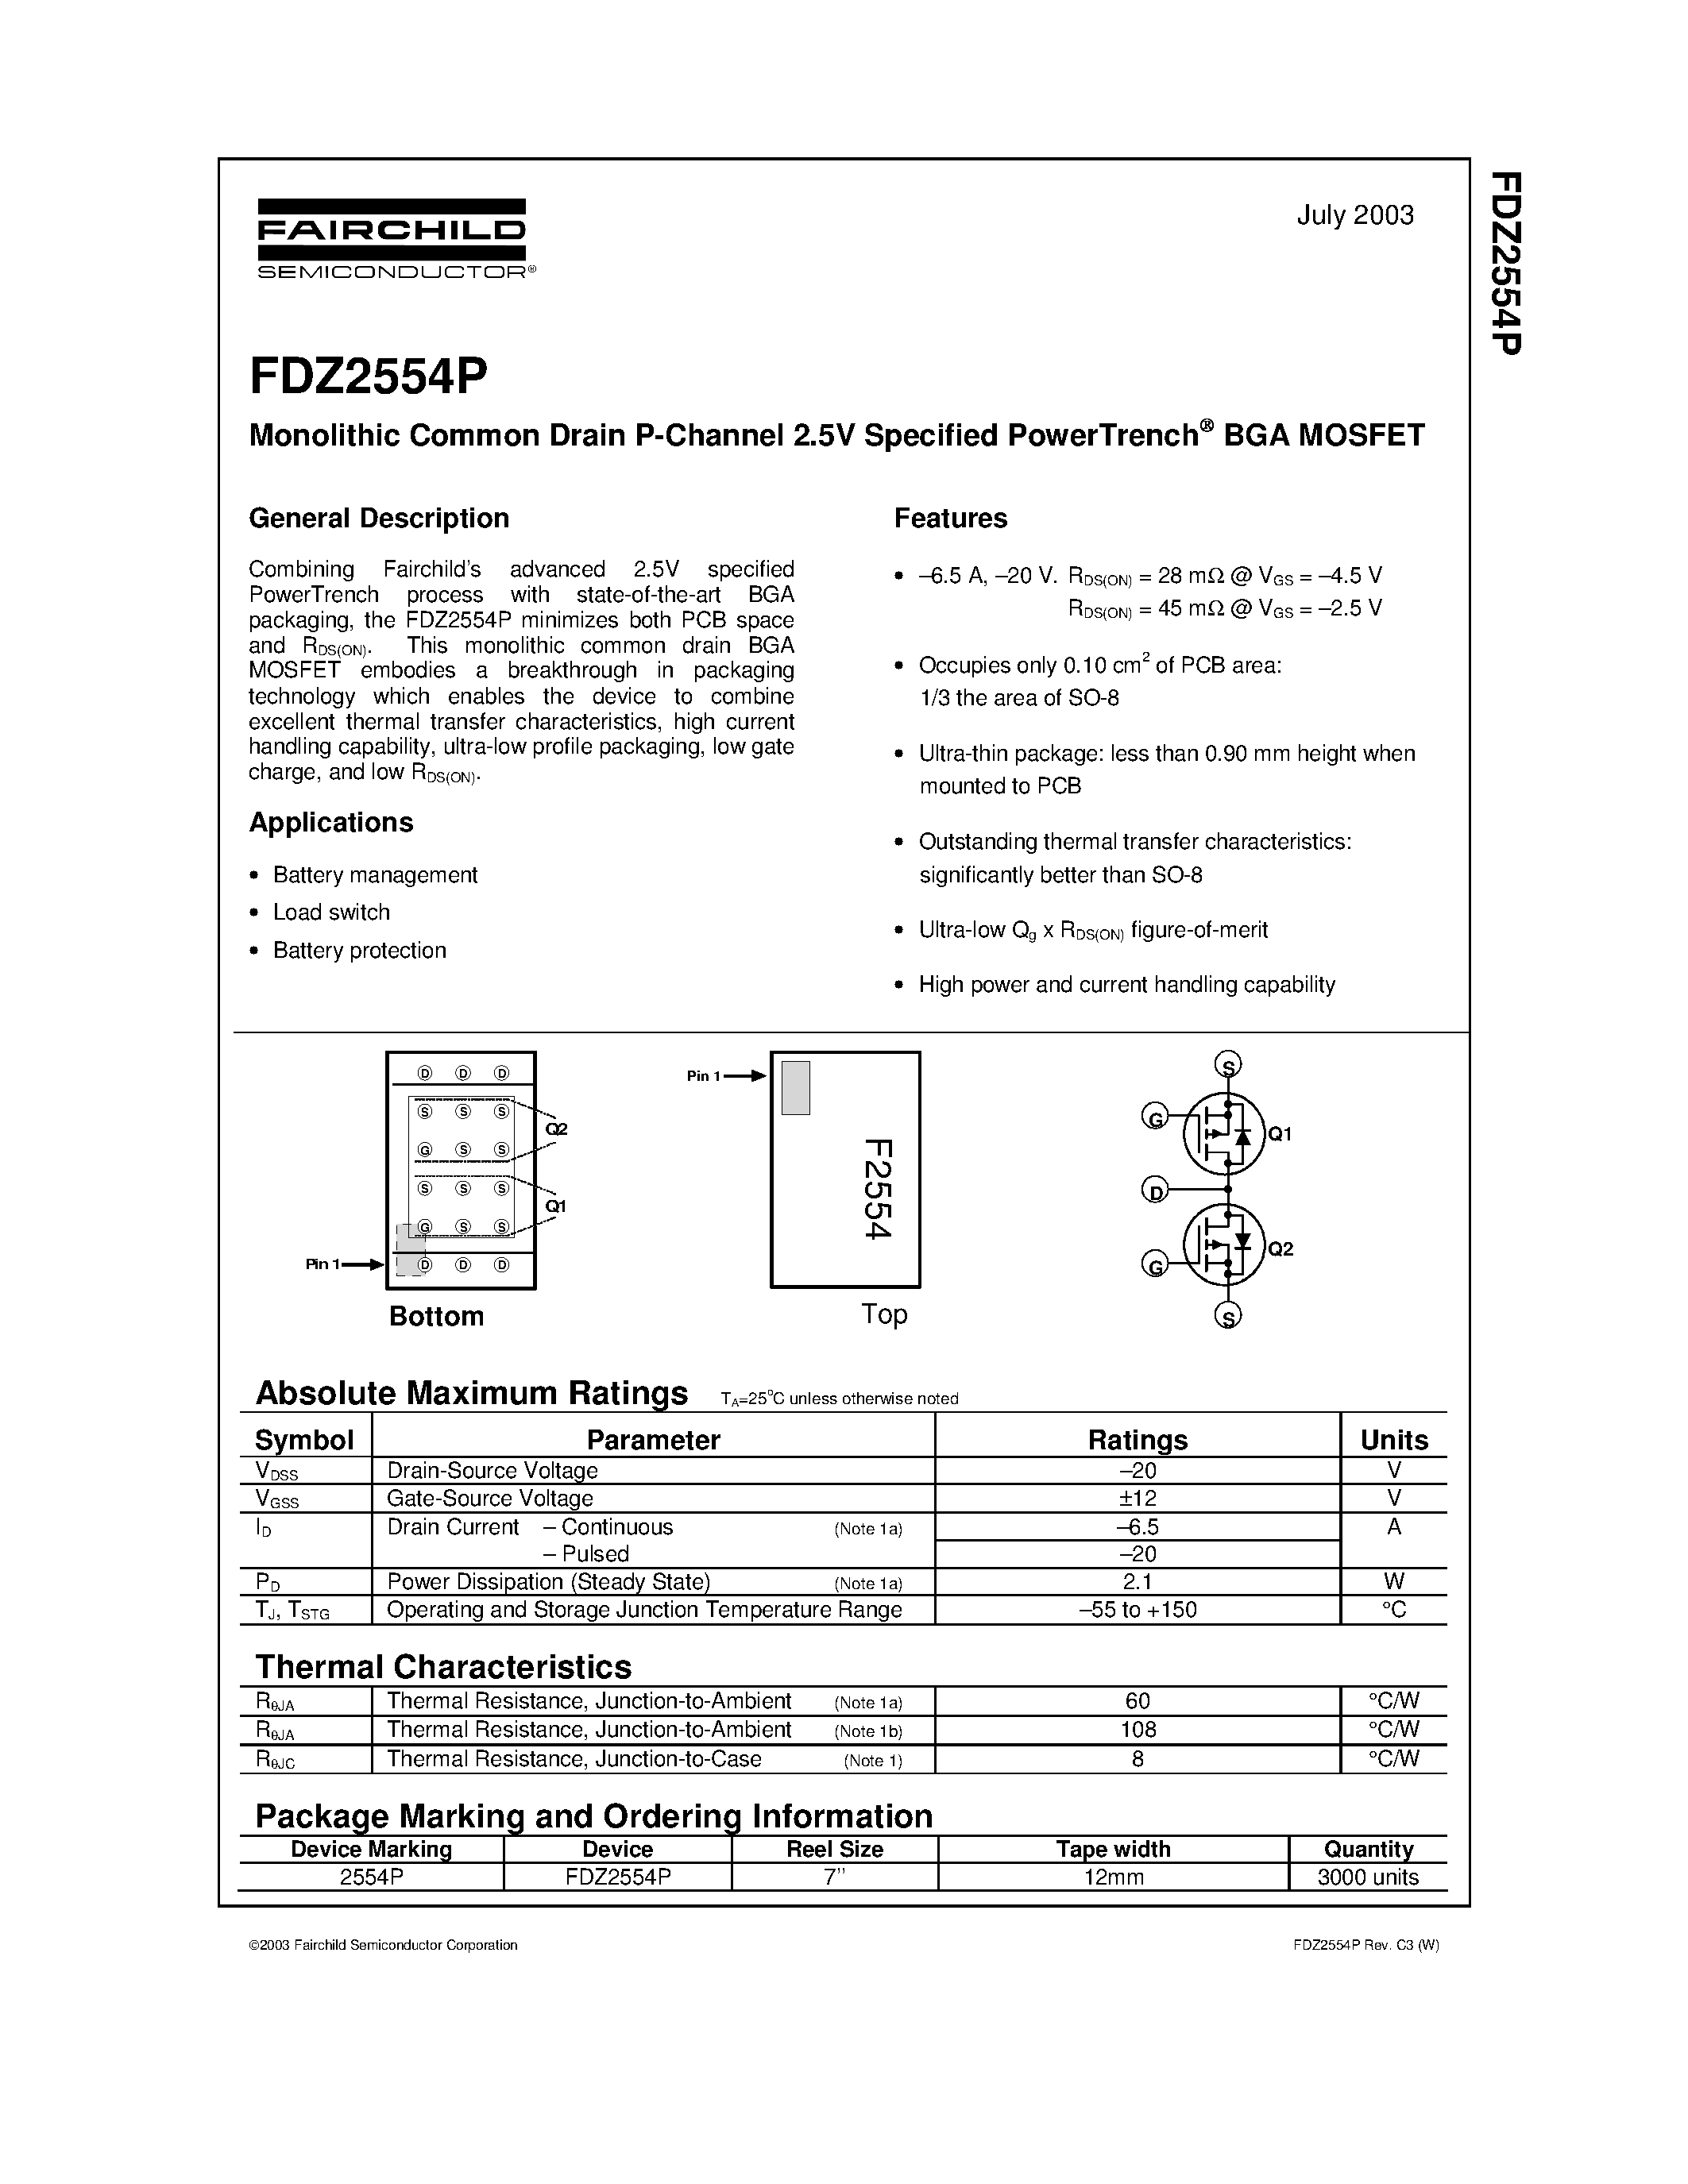 Даташит FDZ2554P - Monolithic Common Drain P-Channel 2.5V Specified PowerTrench страница 1